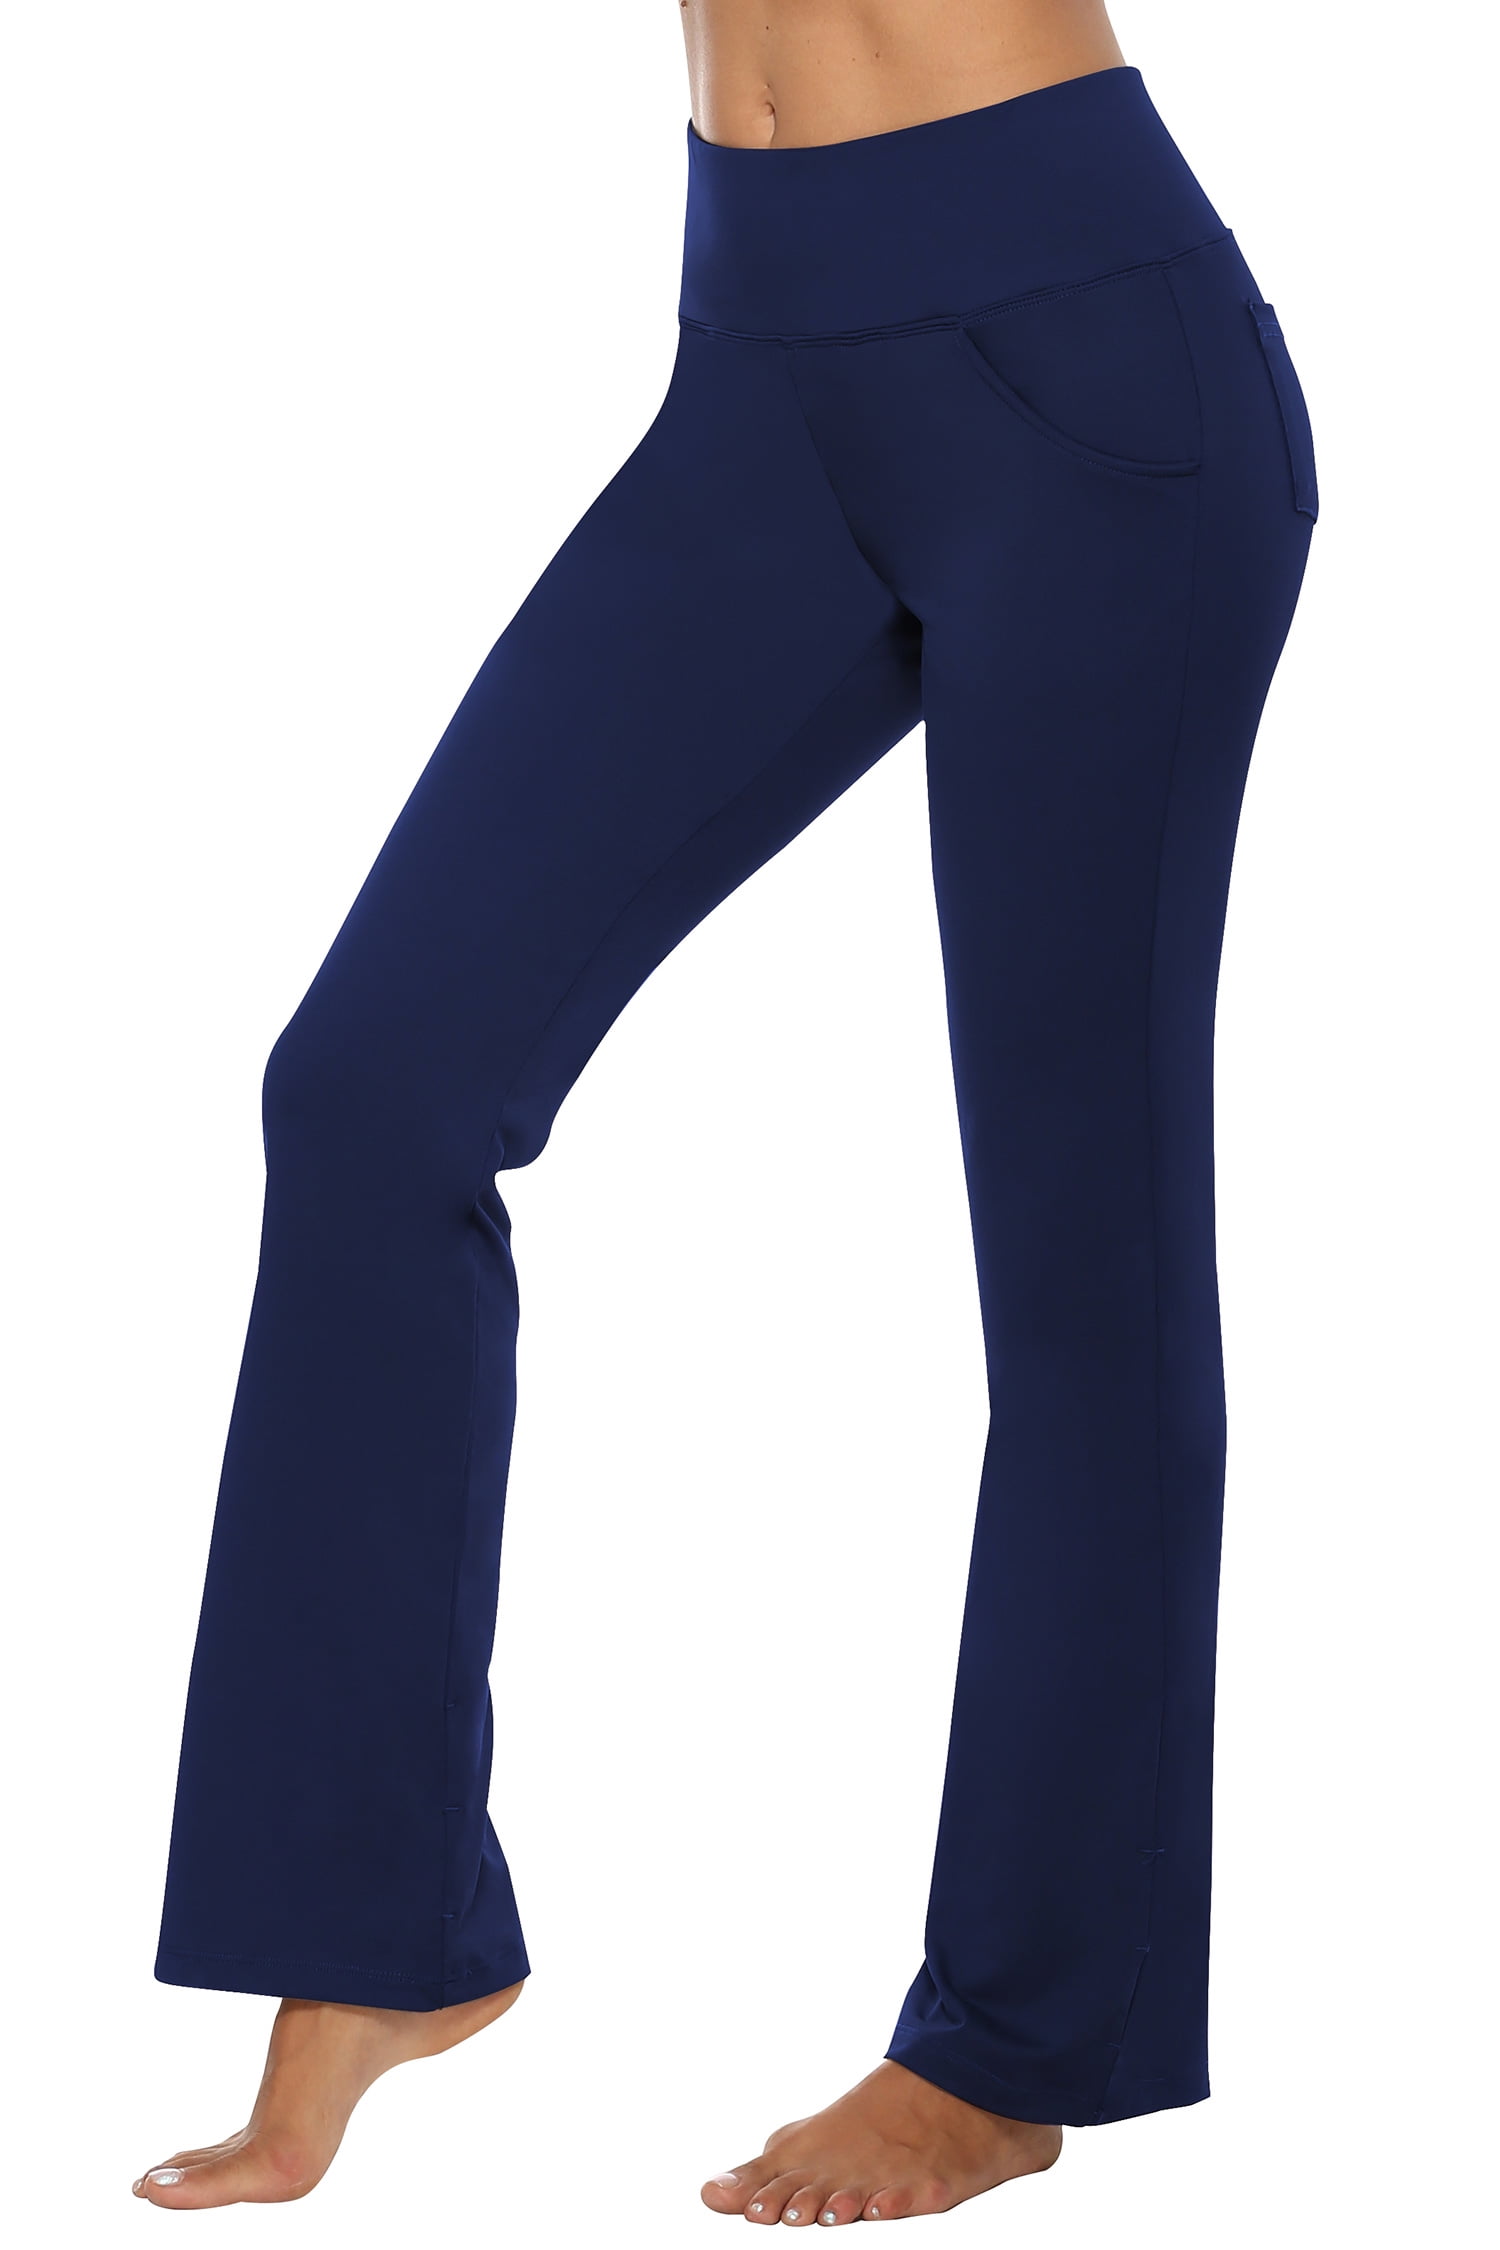 MOCOLY Women's Bootcut Yoga Workout Pants with 4 Pockets,Navy-L ...